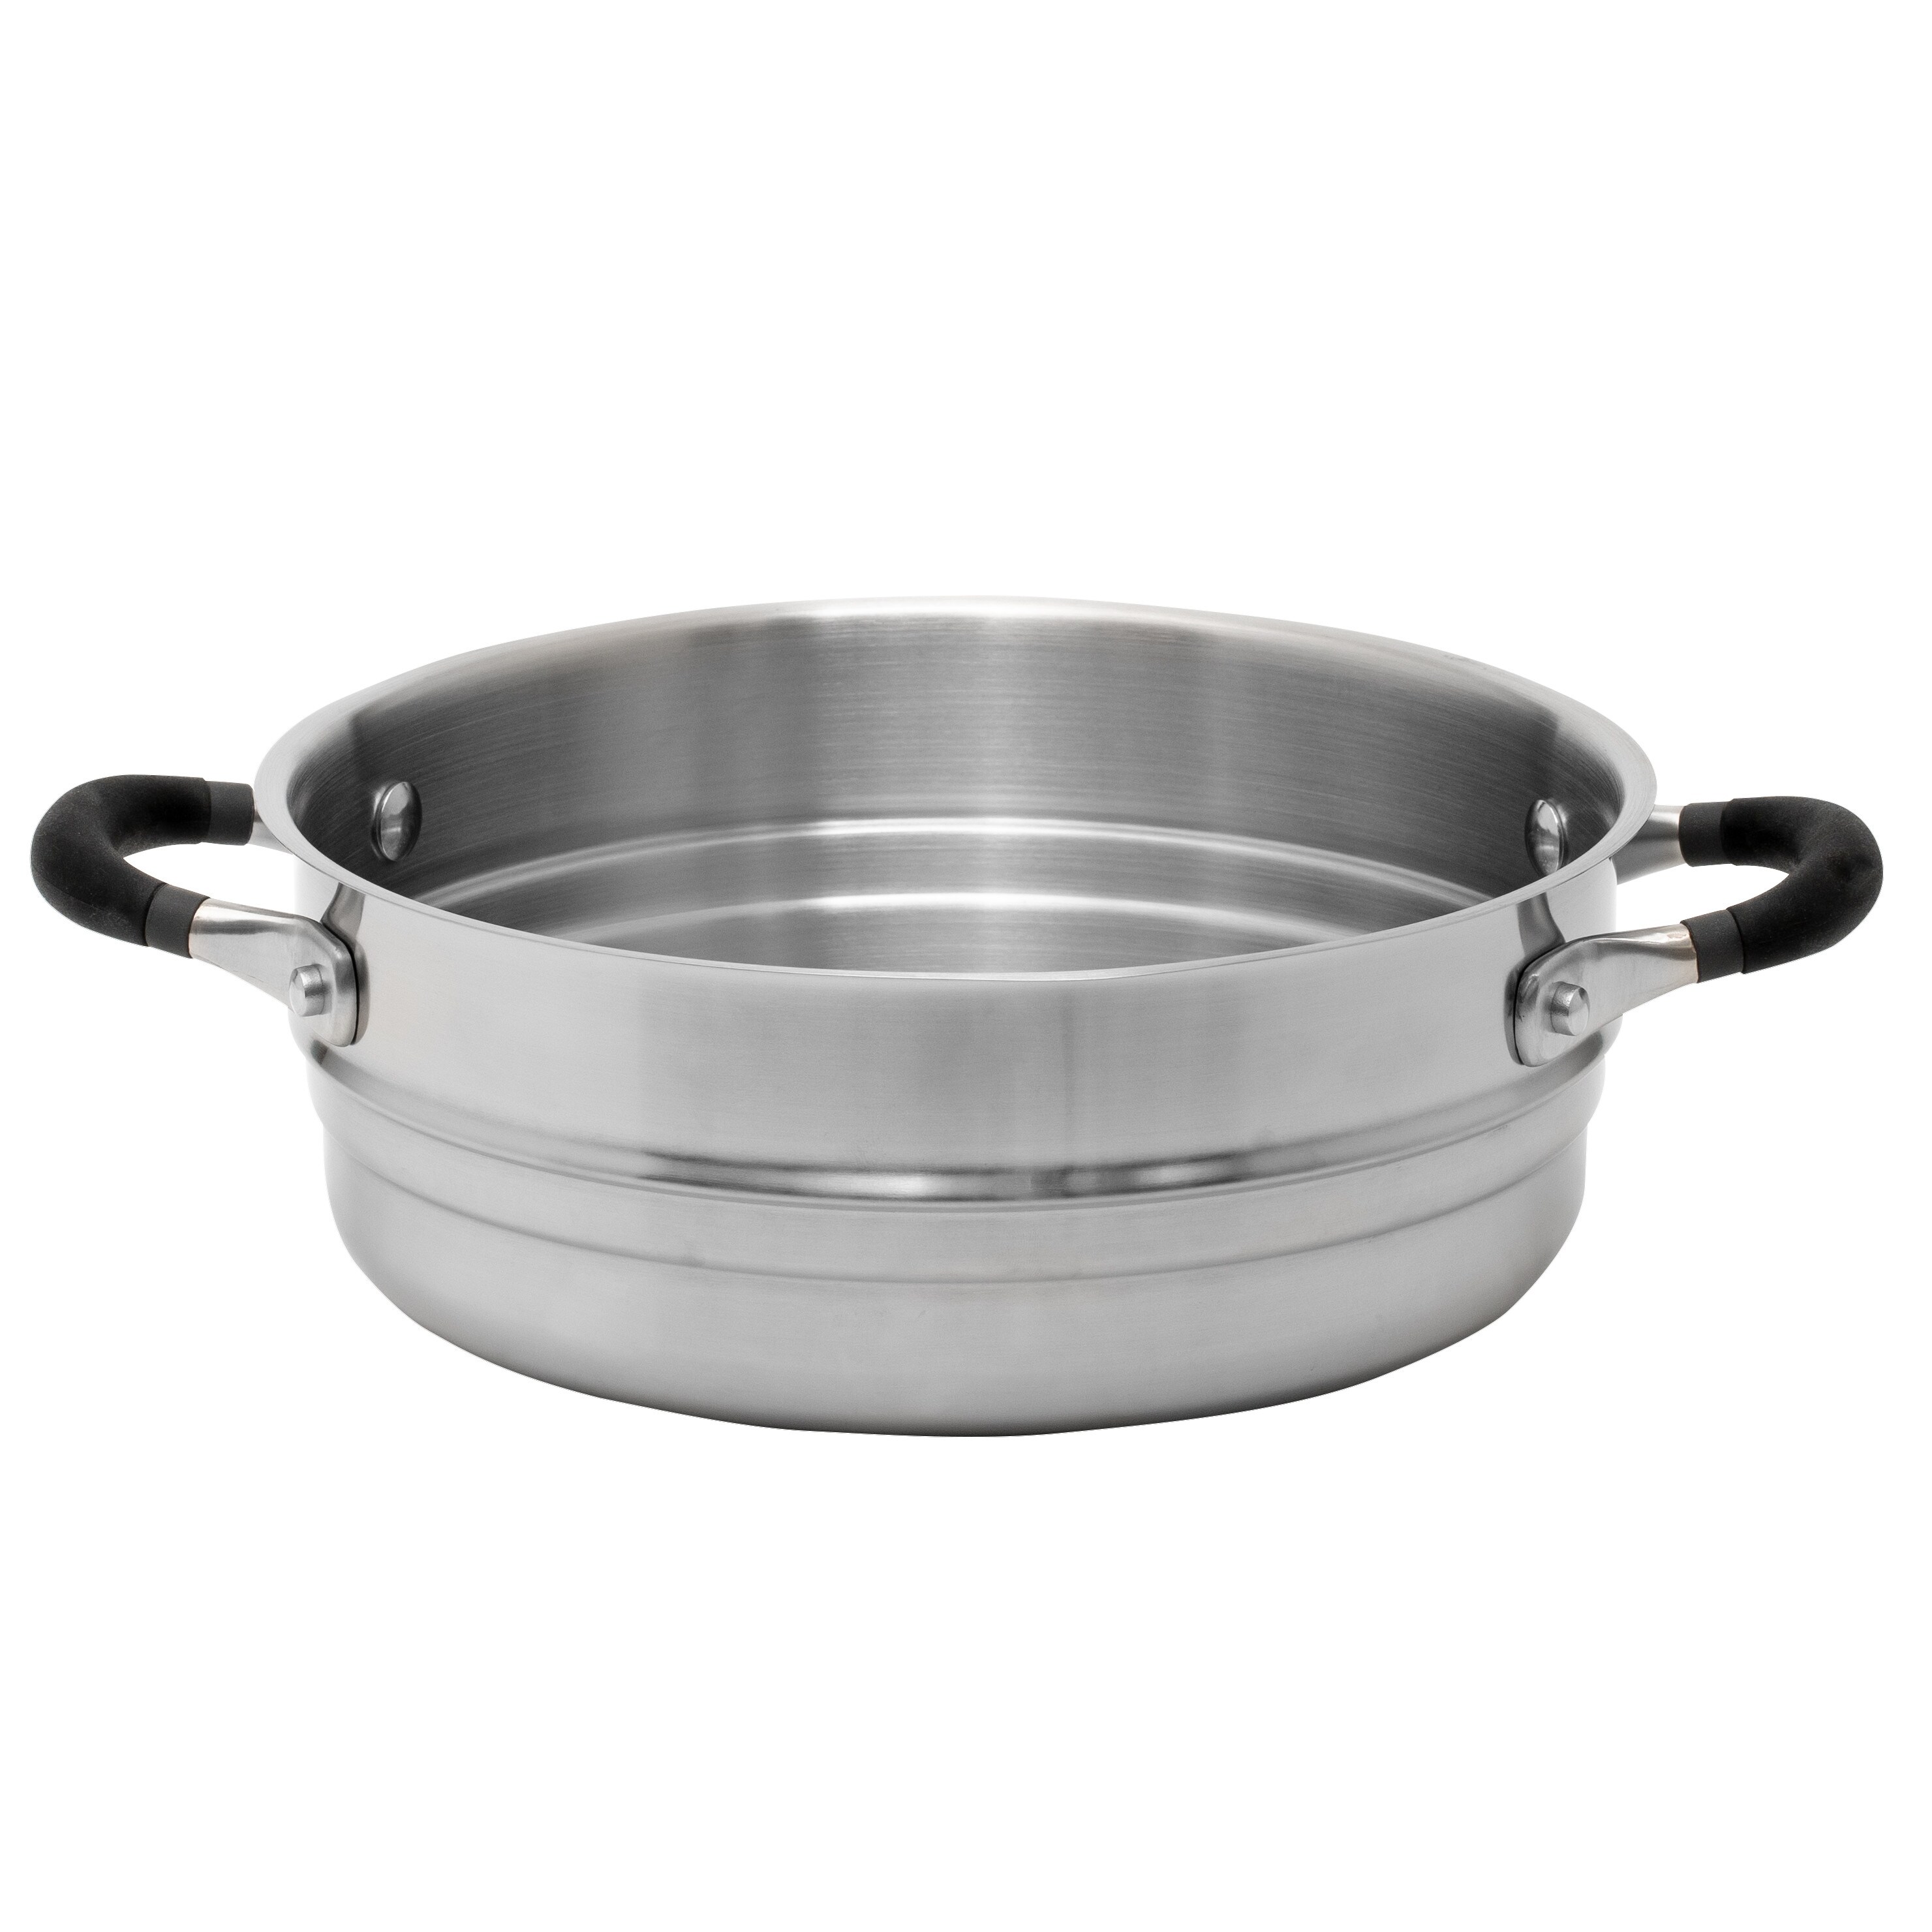 https://ak1.ostkcdn.com/images/products/is/images/direct/cb2b4a74bb39c587f5fe489a10484f130b359c3f/Meyer-Accent-Series-Stainless-Steel-Steamer-Insert%2C-5-Quart.jpg